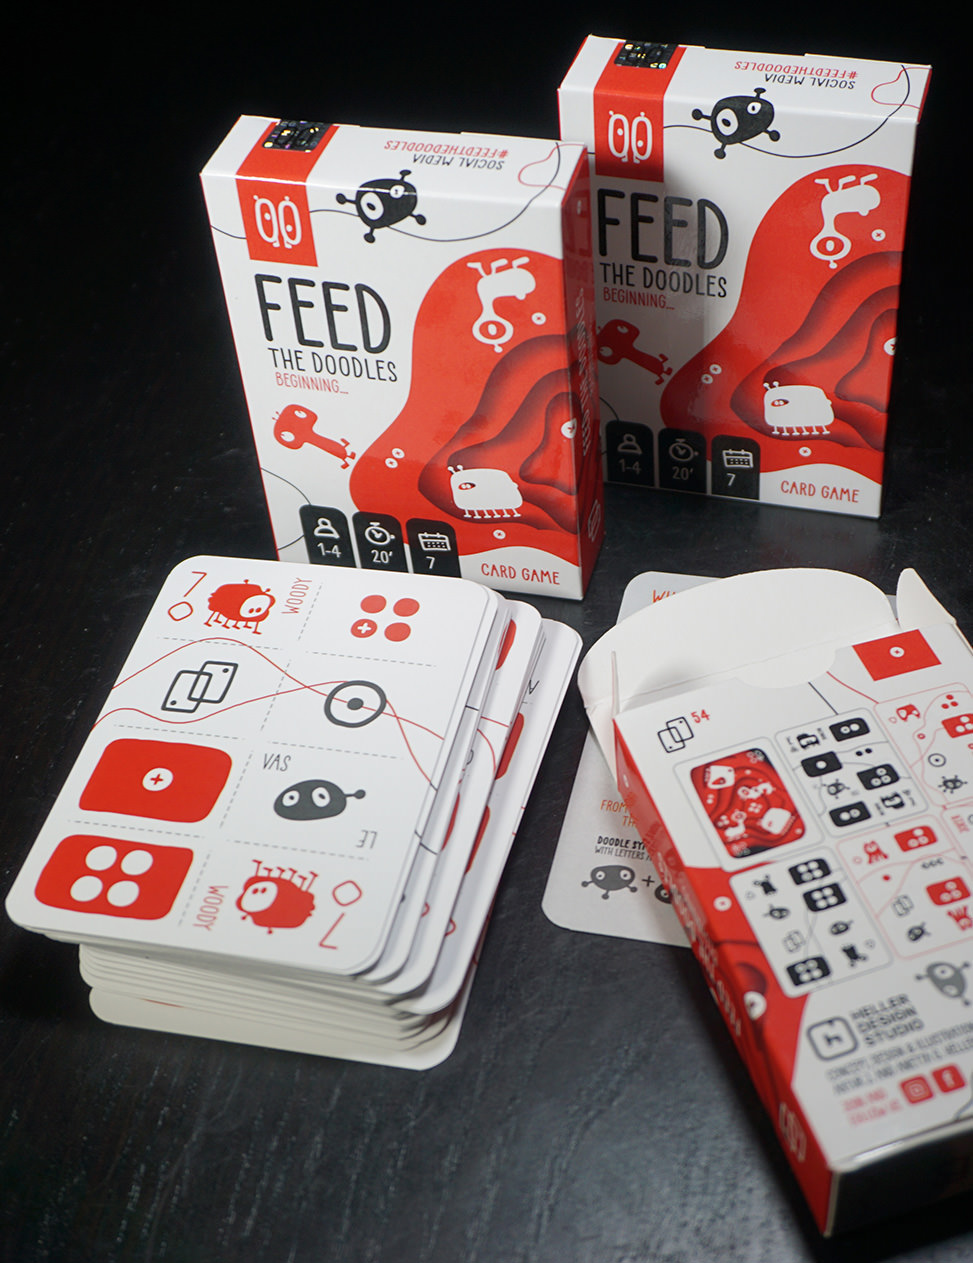 info-box-1-card-game-feed-the-doodles1-2020